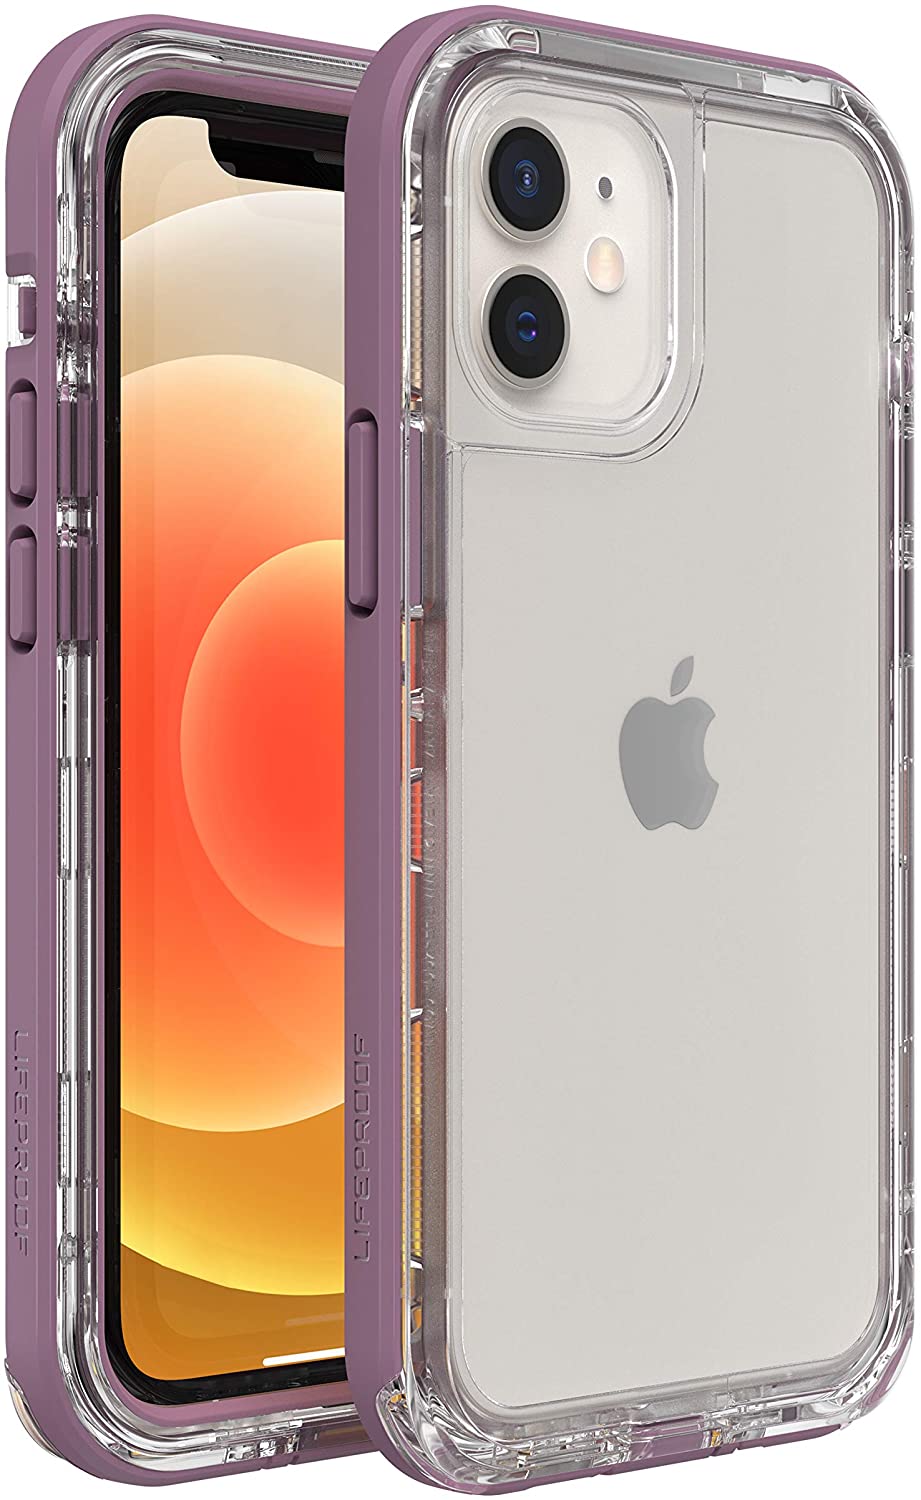 LifeProof NEXT SERIES Case for Apple iPhone 12 Mini - Clear/Lavender (New)